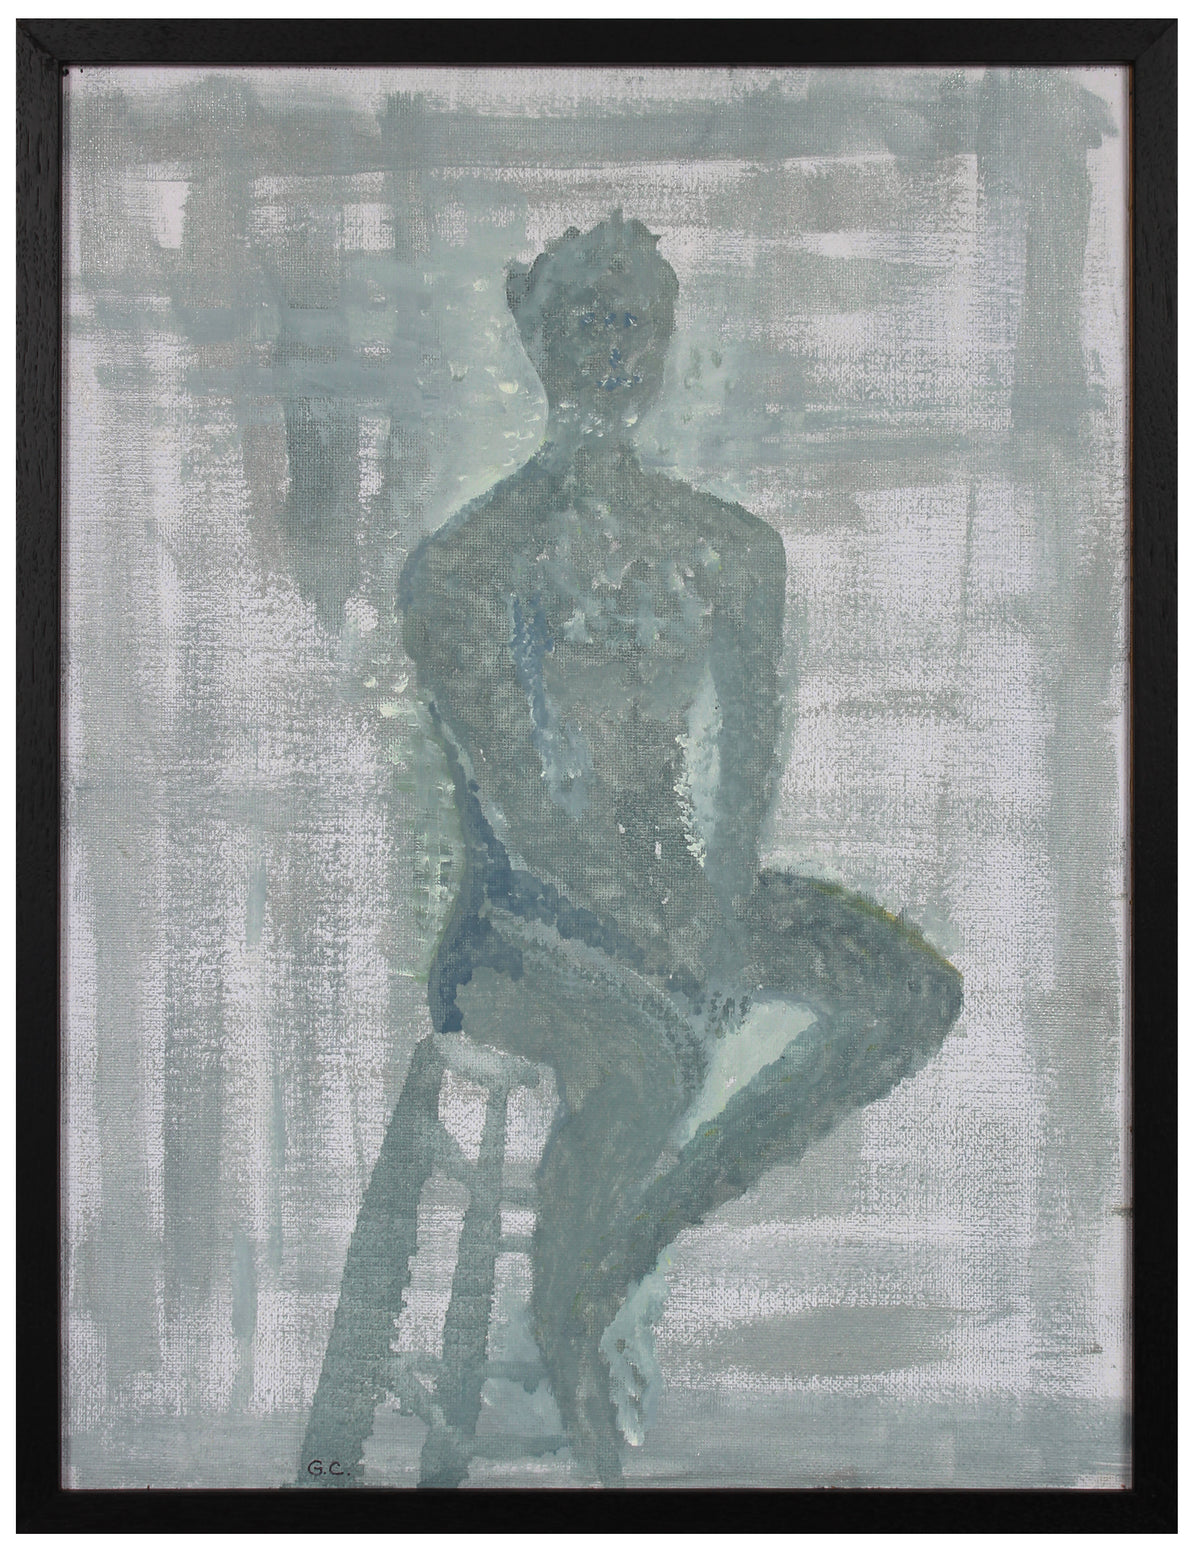 &lt;i&gt;Dog Wood - Seated Nude&lt;/i&gt; &lt;br&gt;2020 Oil on Canvas Mounted to Board&lt;br&gt;&lt;br&gt;#B2062